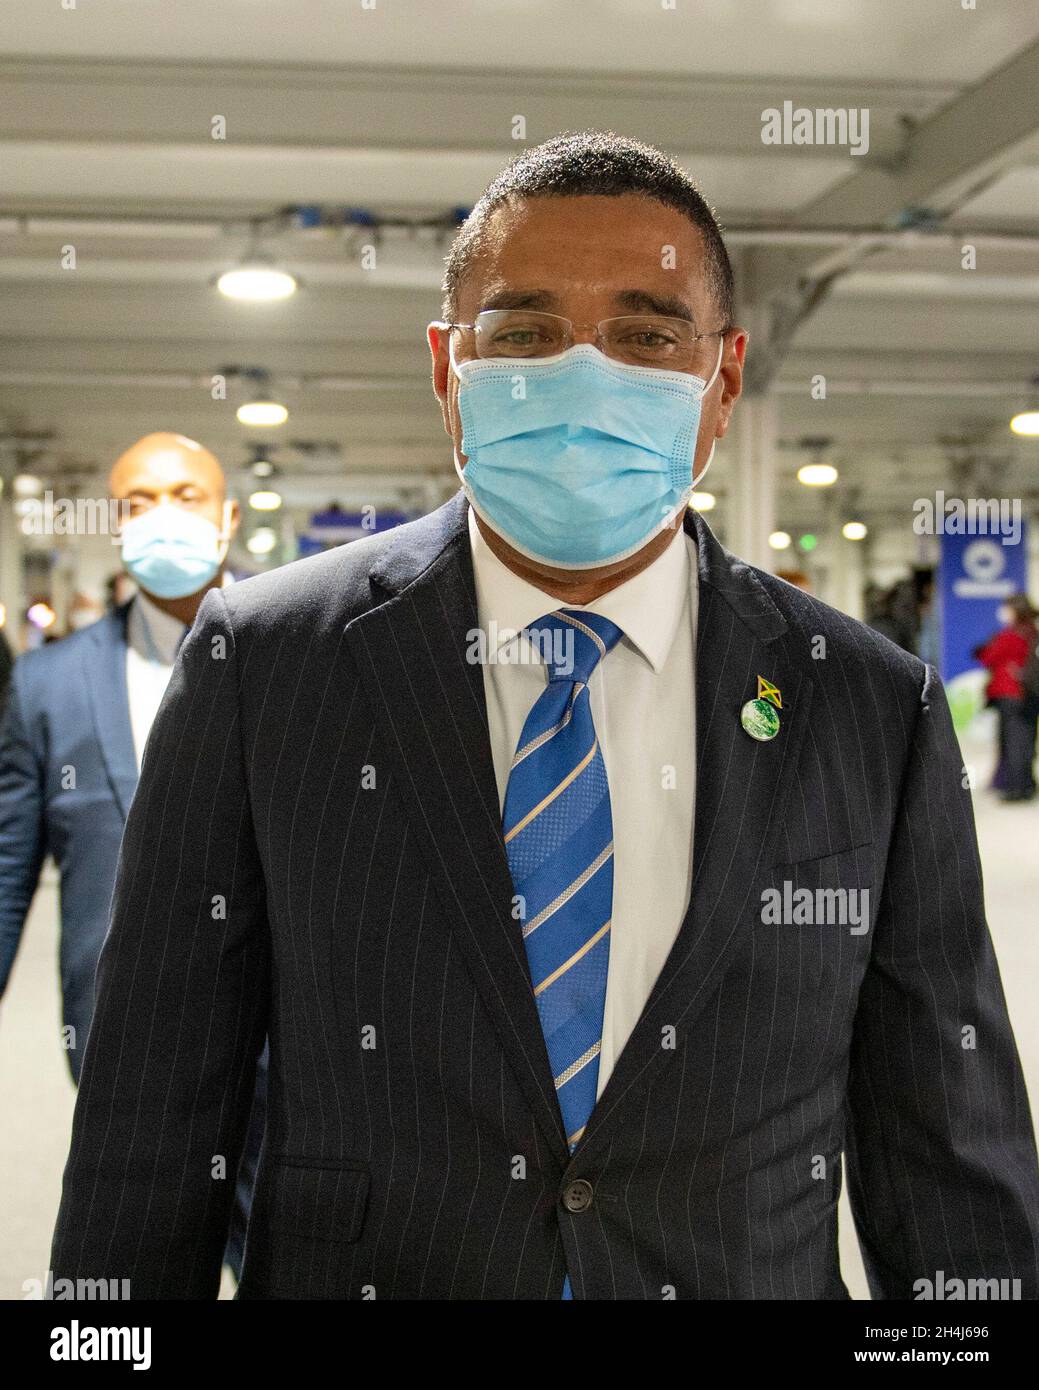 Glasgow, Scotland, UK. 2 November 2021 PICTURED: Andrew Holness, Prime Minister of Jamaica seen at COP26. Andrew Michael Holness, ON PC (born 22 July 1972) is a Jamaican politician who has been the Prime Minister of Jamaica since 3 March 2016, following the 2016 Jamaican general election. Holness previously served as prime minister from October 2011 to 5 January 2012. He succeeded Bruce Golding as prime minister, and decided to go to the polls in the 29 December 2011 general election in an attempt to get his own mandate from the Jamaican electorate. Credit: Colin Fisher Stock Photo